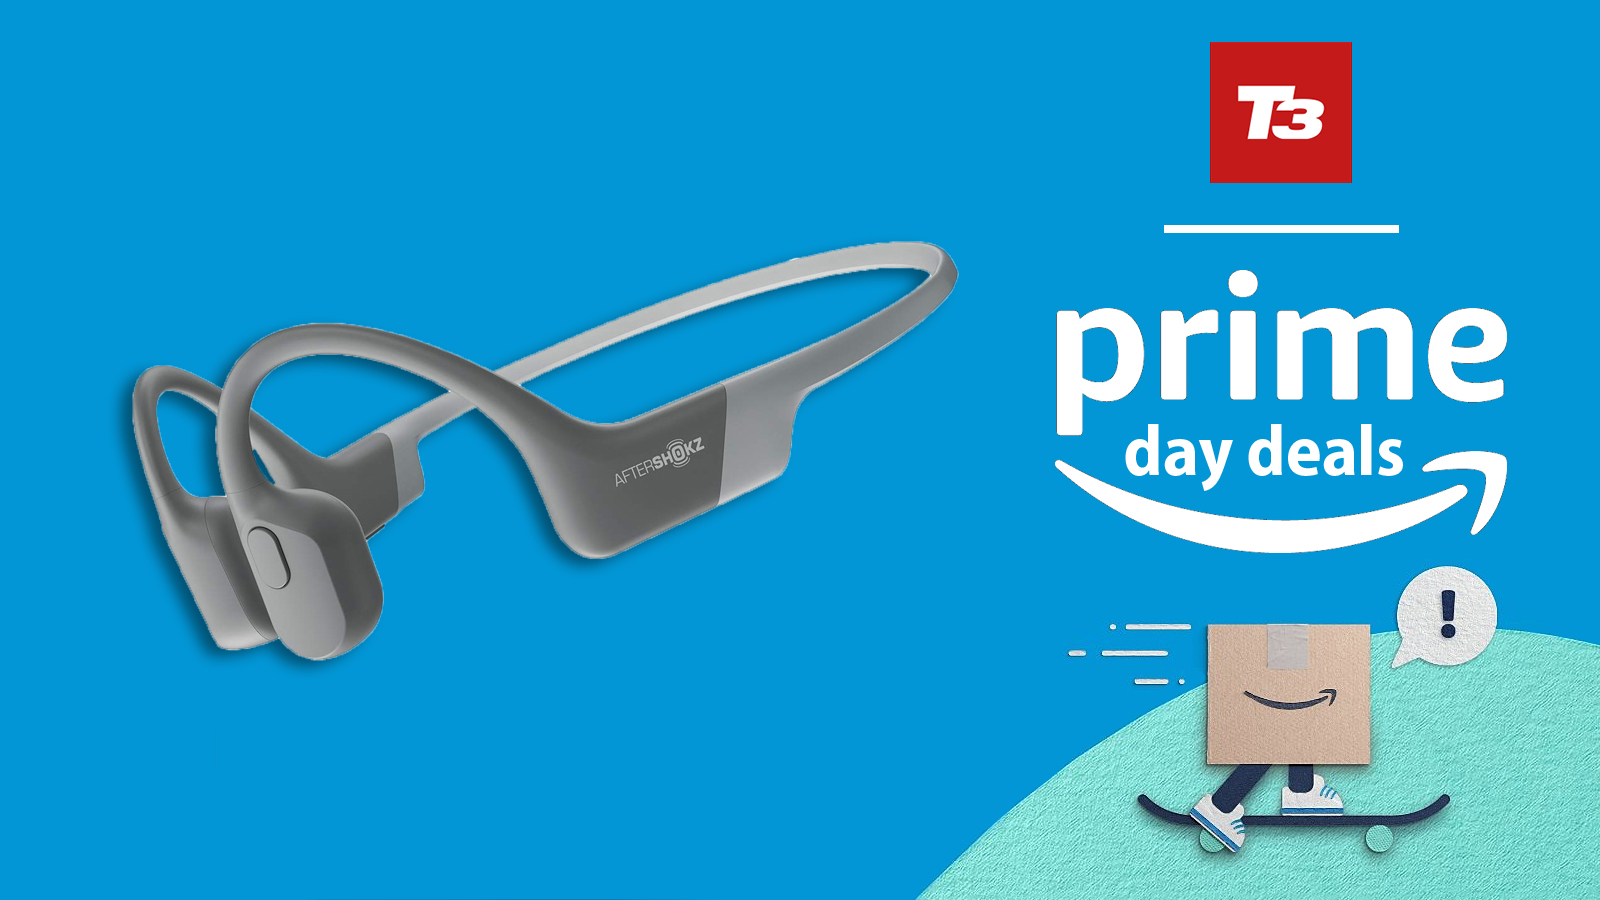 Amazon Prime Day Aftershokz deal: save up to 30% on your new